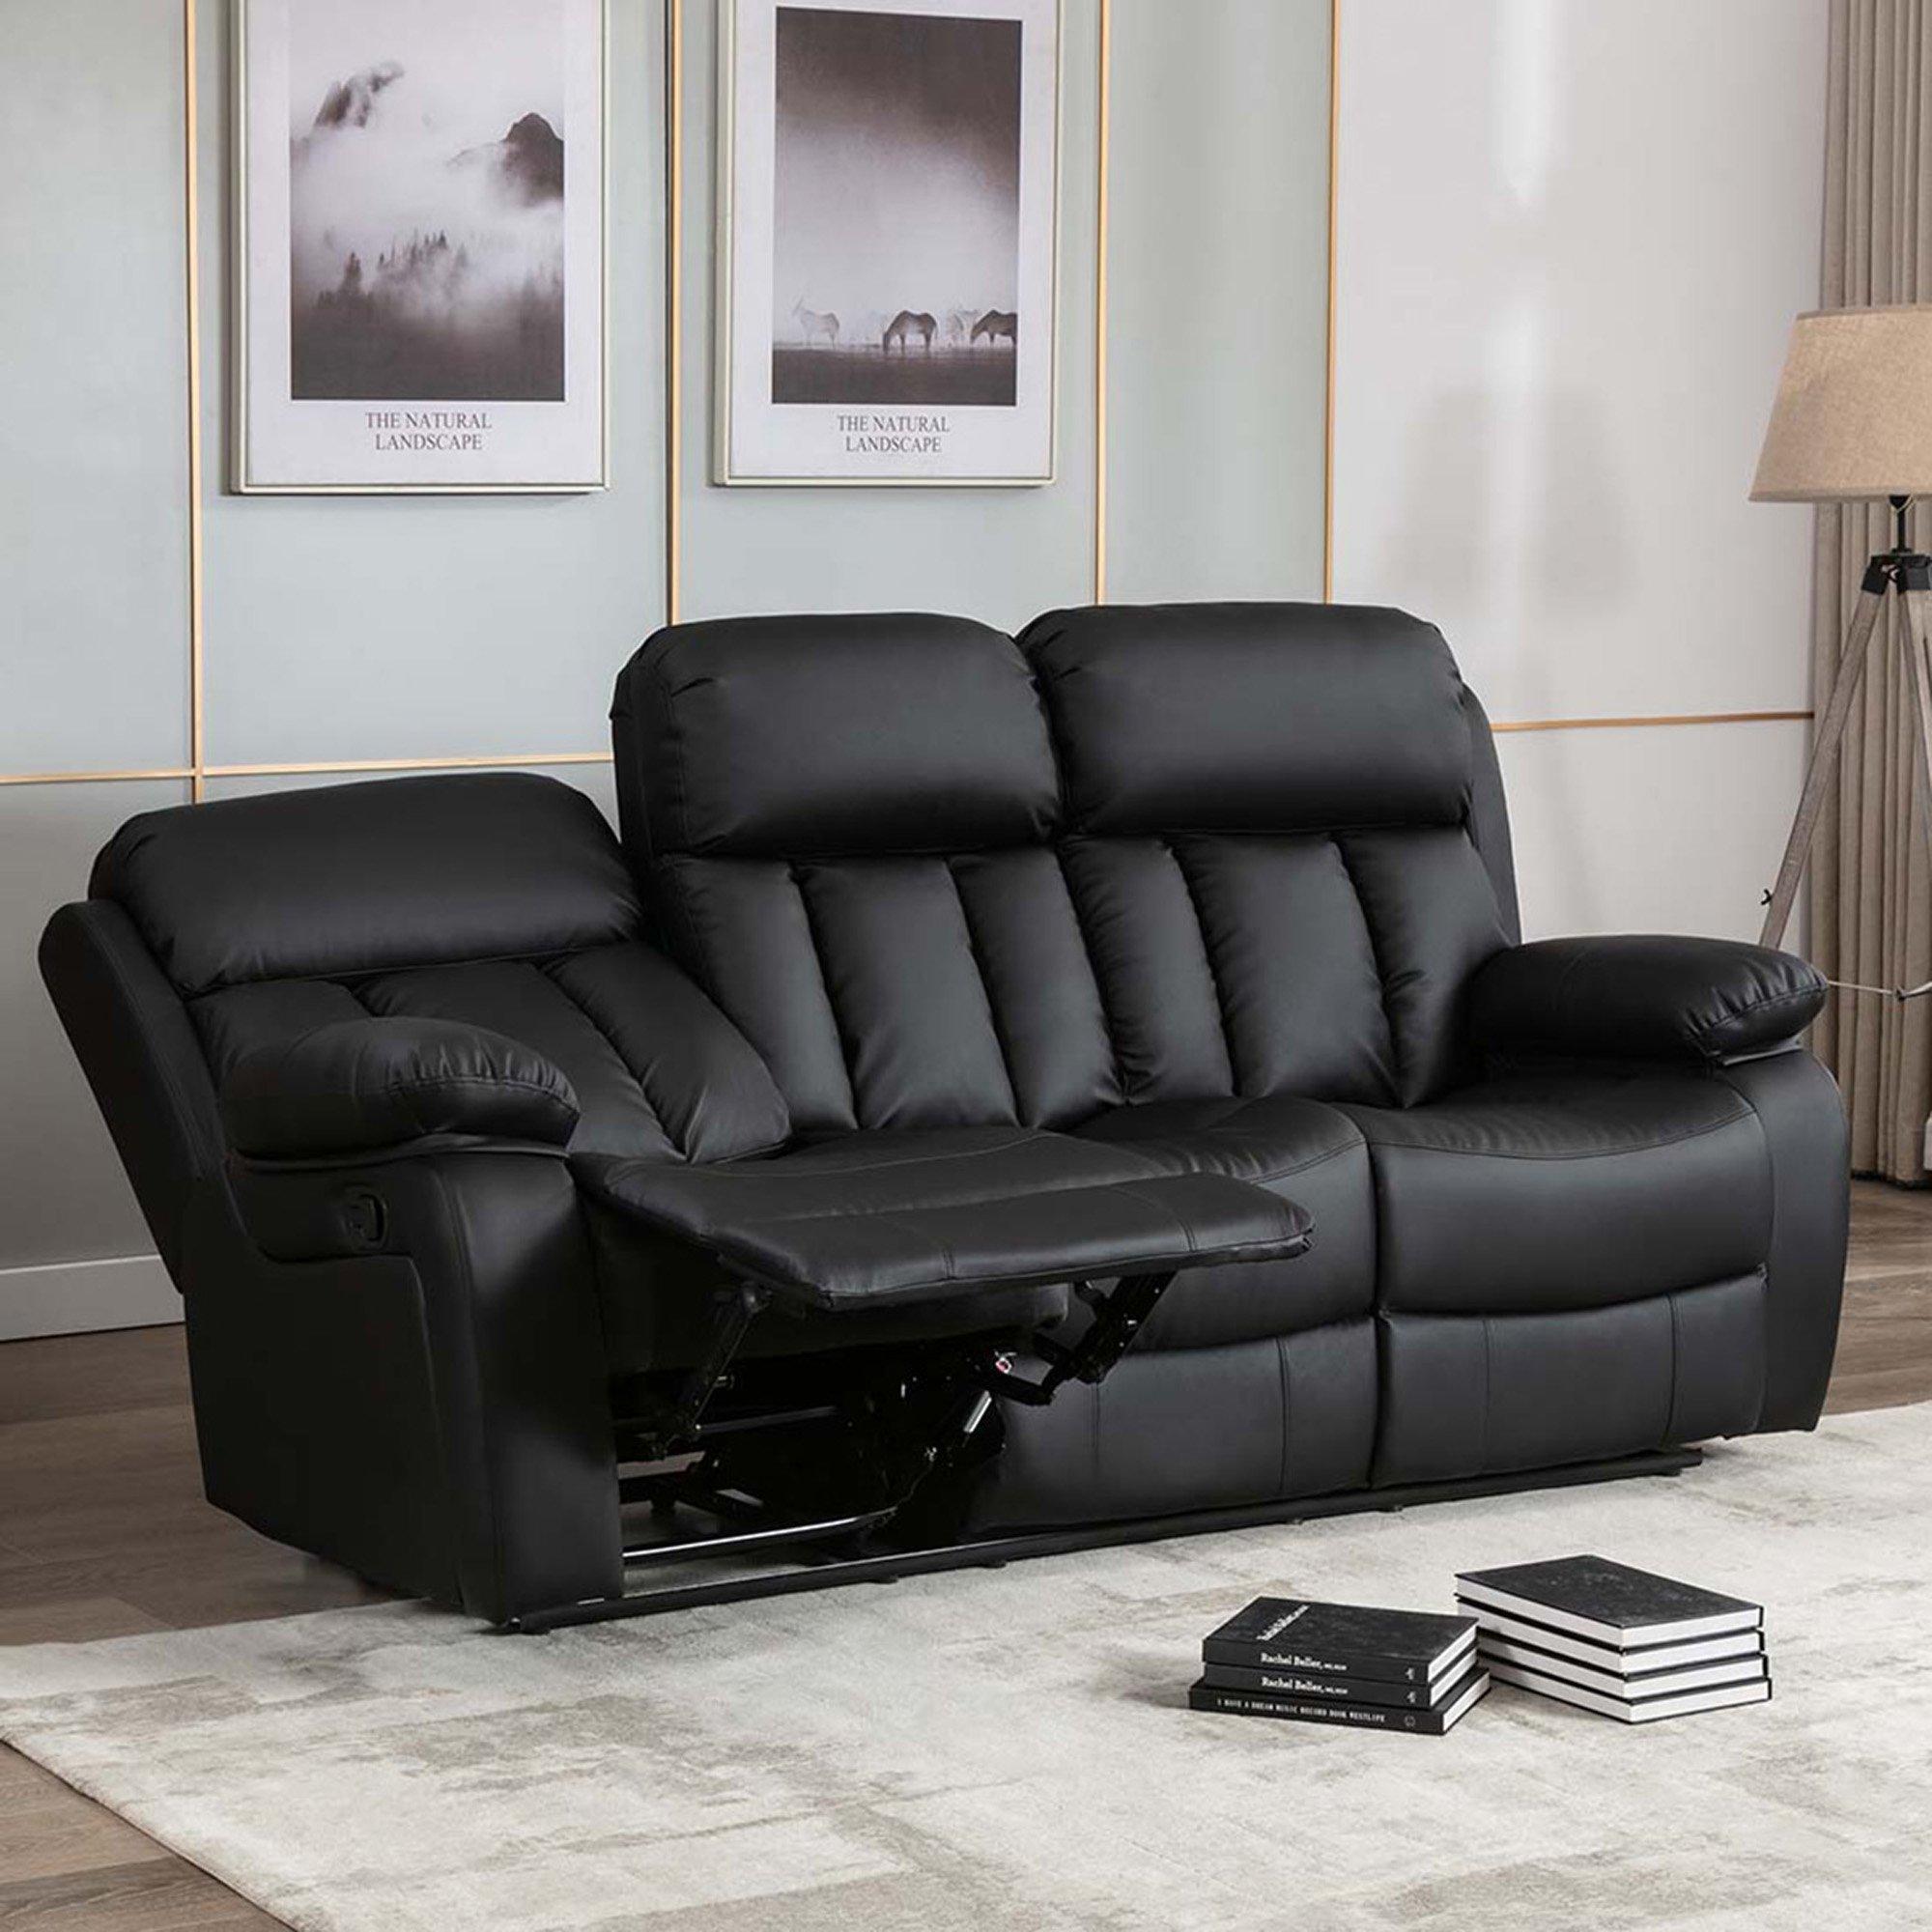 Chester 3 Seater Manual High Back Bonded Leather Recliner Sofa